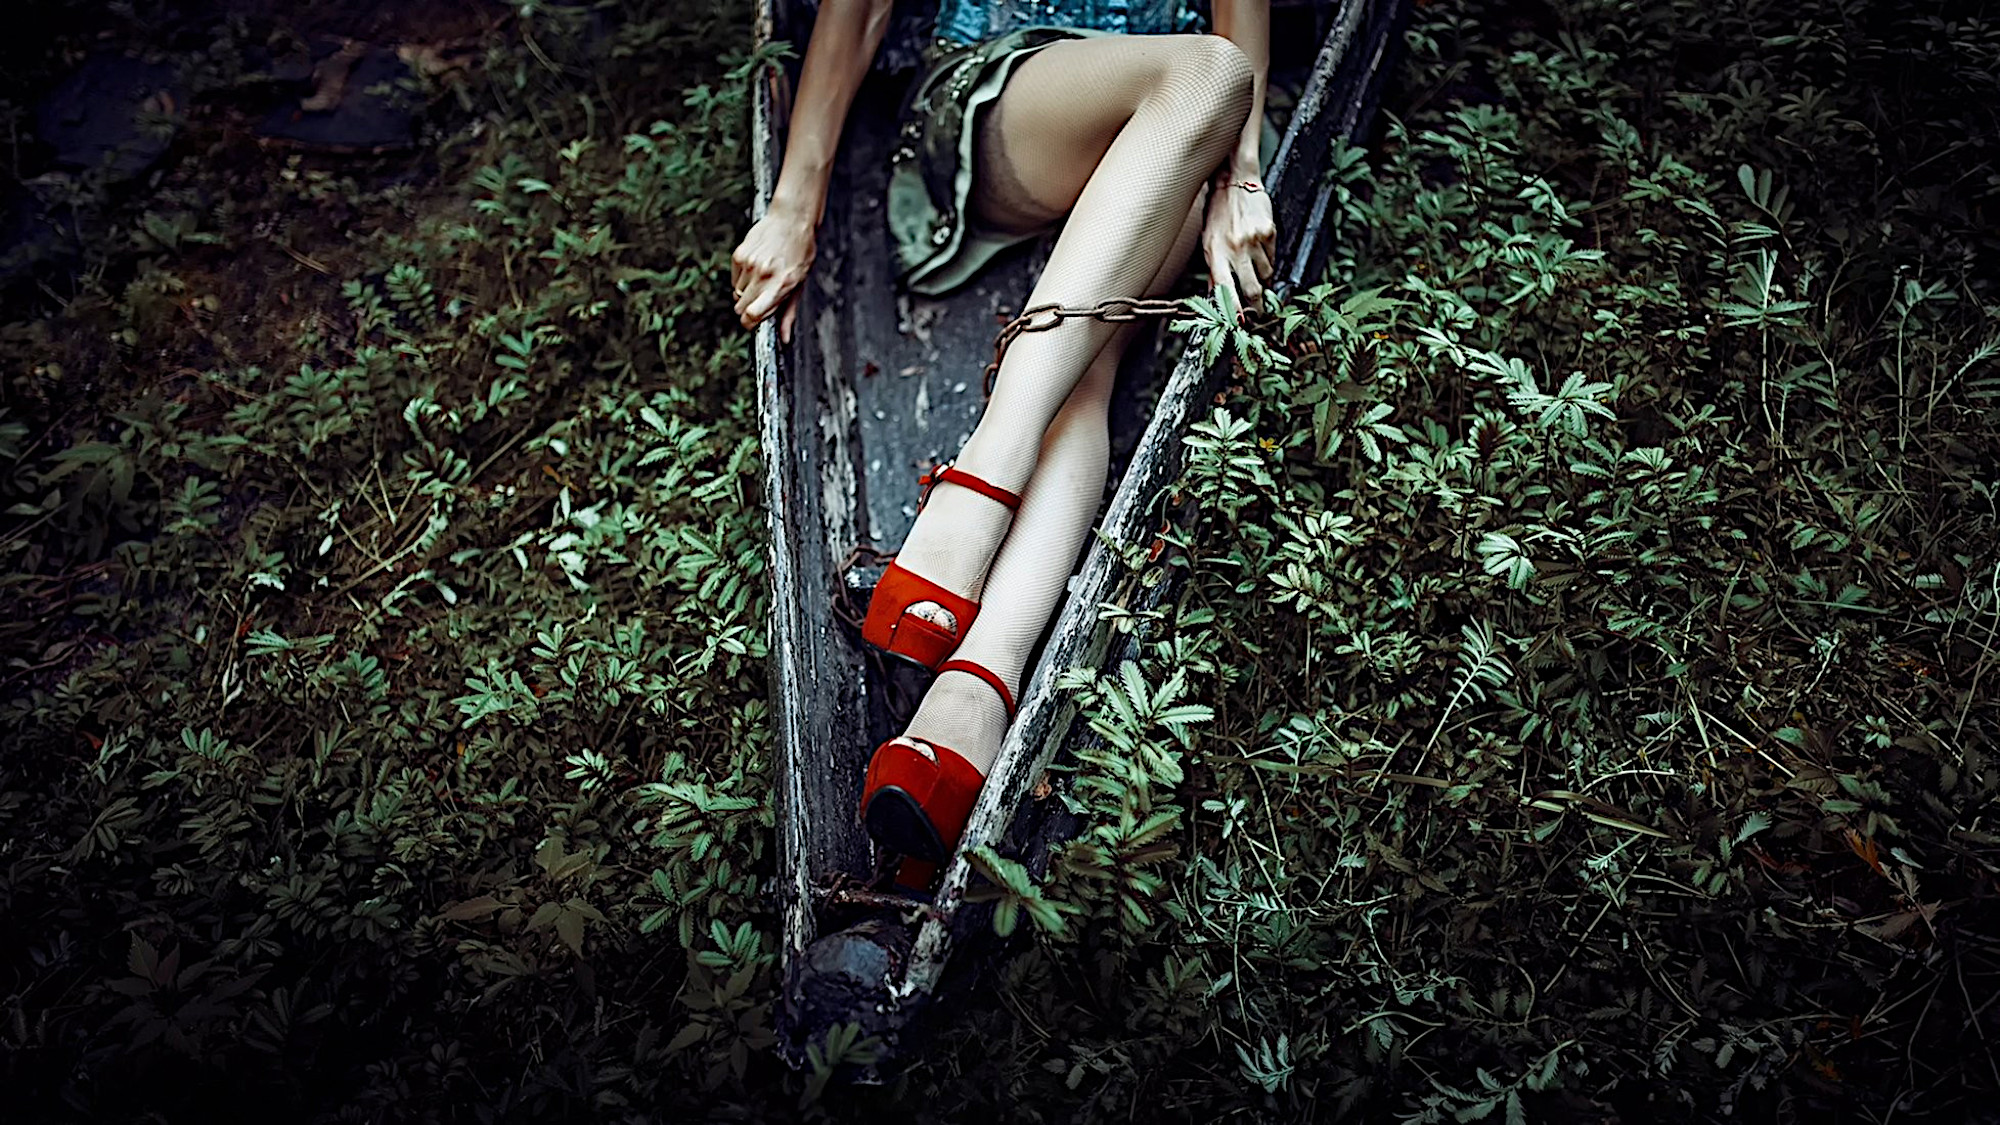 A girl in red heels in the woods.